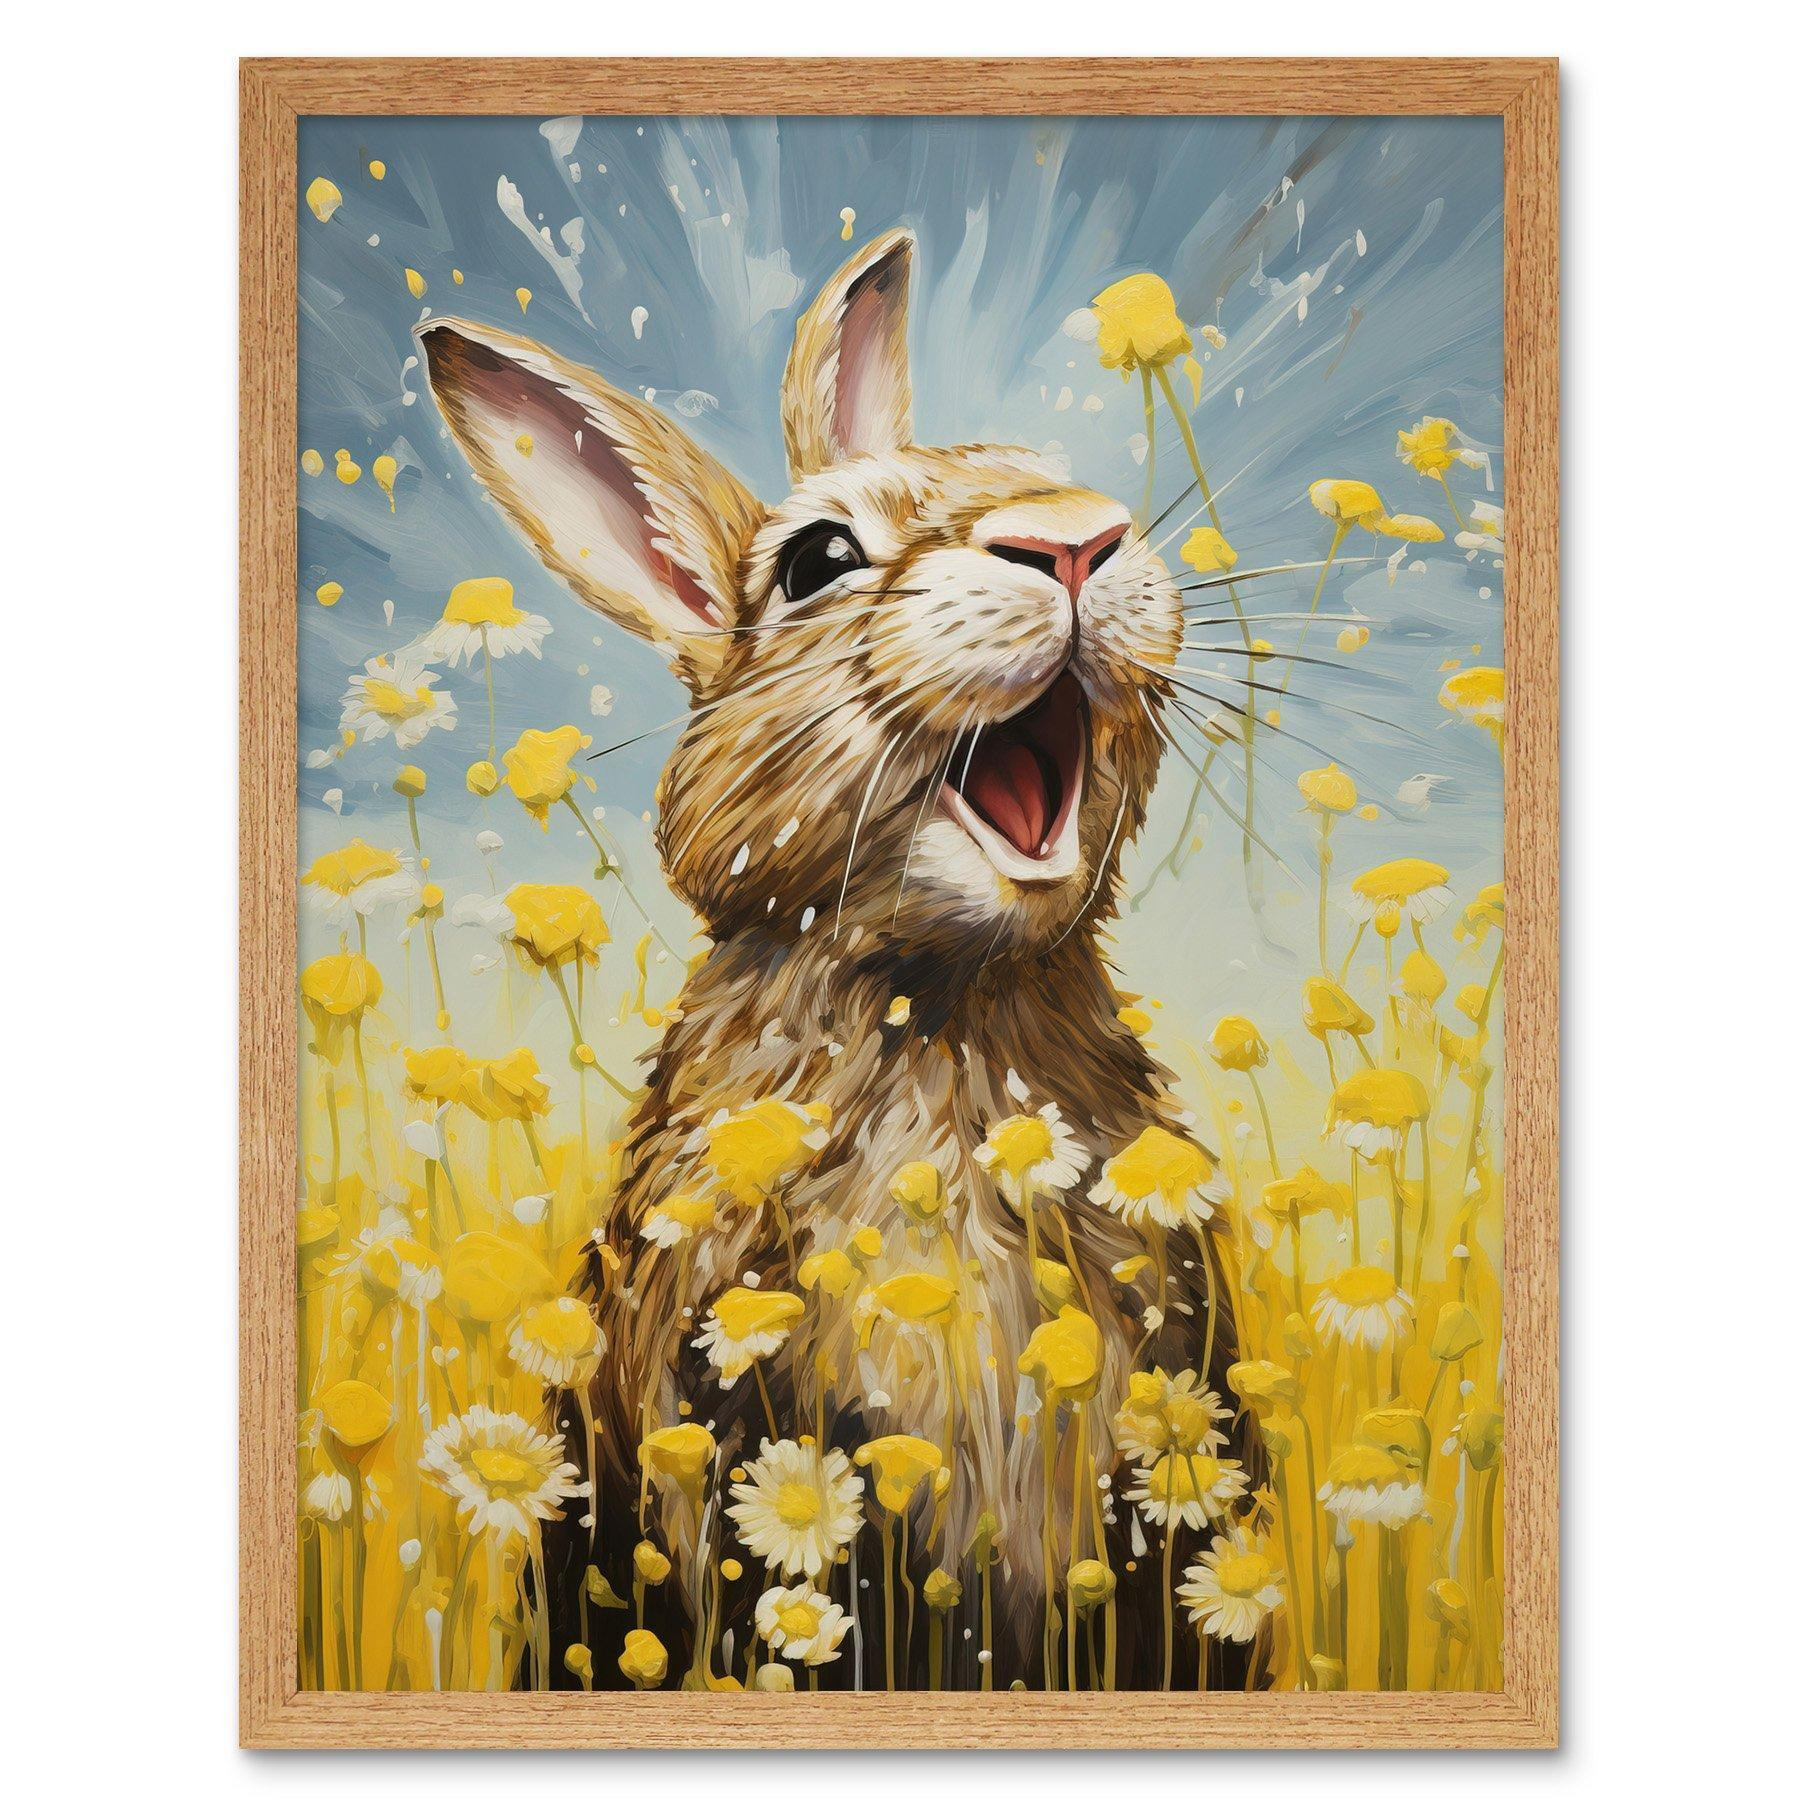 The Happy Bunny Rabbit Playing in a Field of Daisies Vibrant Oil Painting Kids Bedroom Blue Yellow Bright Summer Meadow Art Print Framed Poster Wall Decor 12x16 inch - image 1